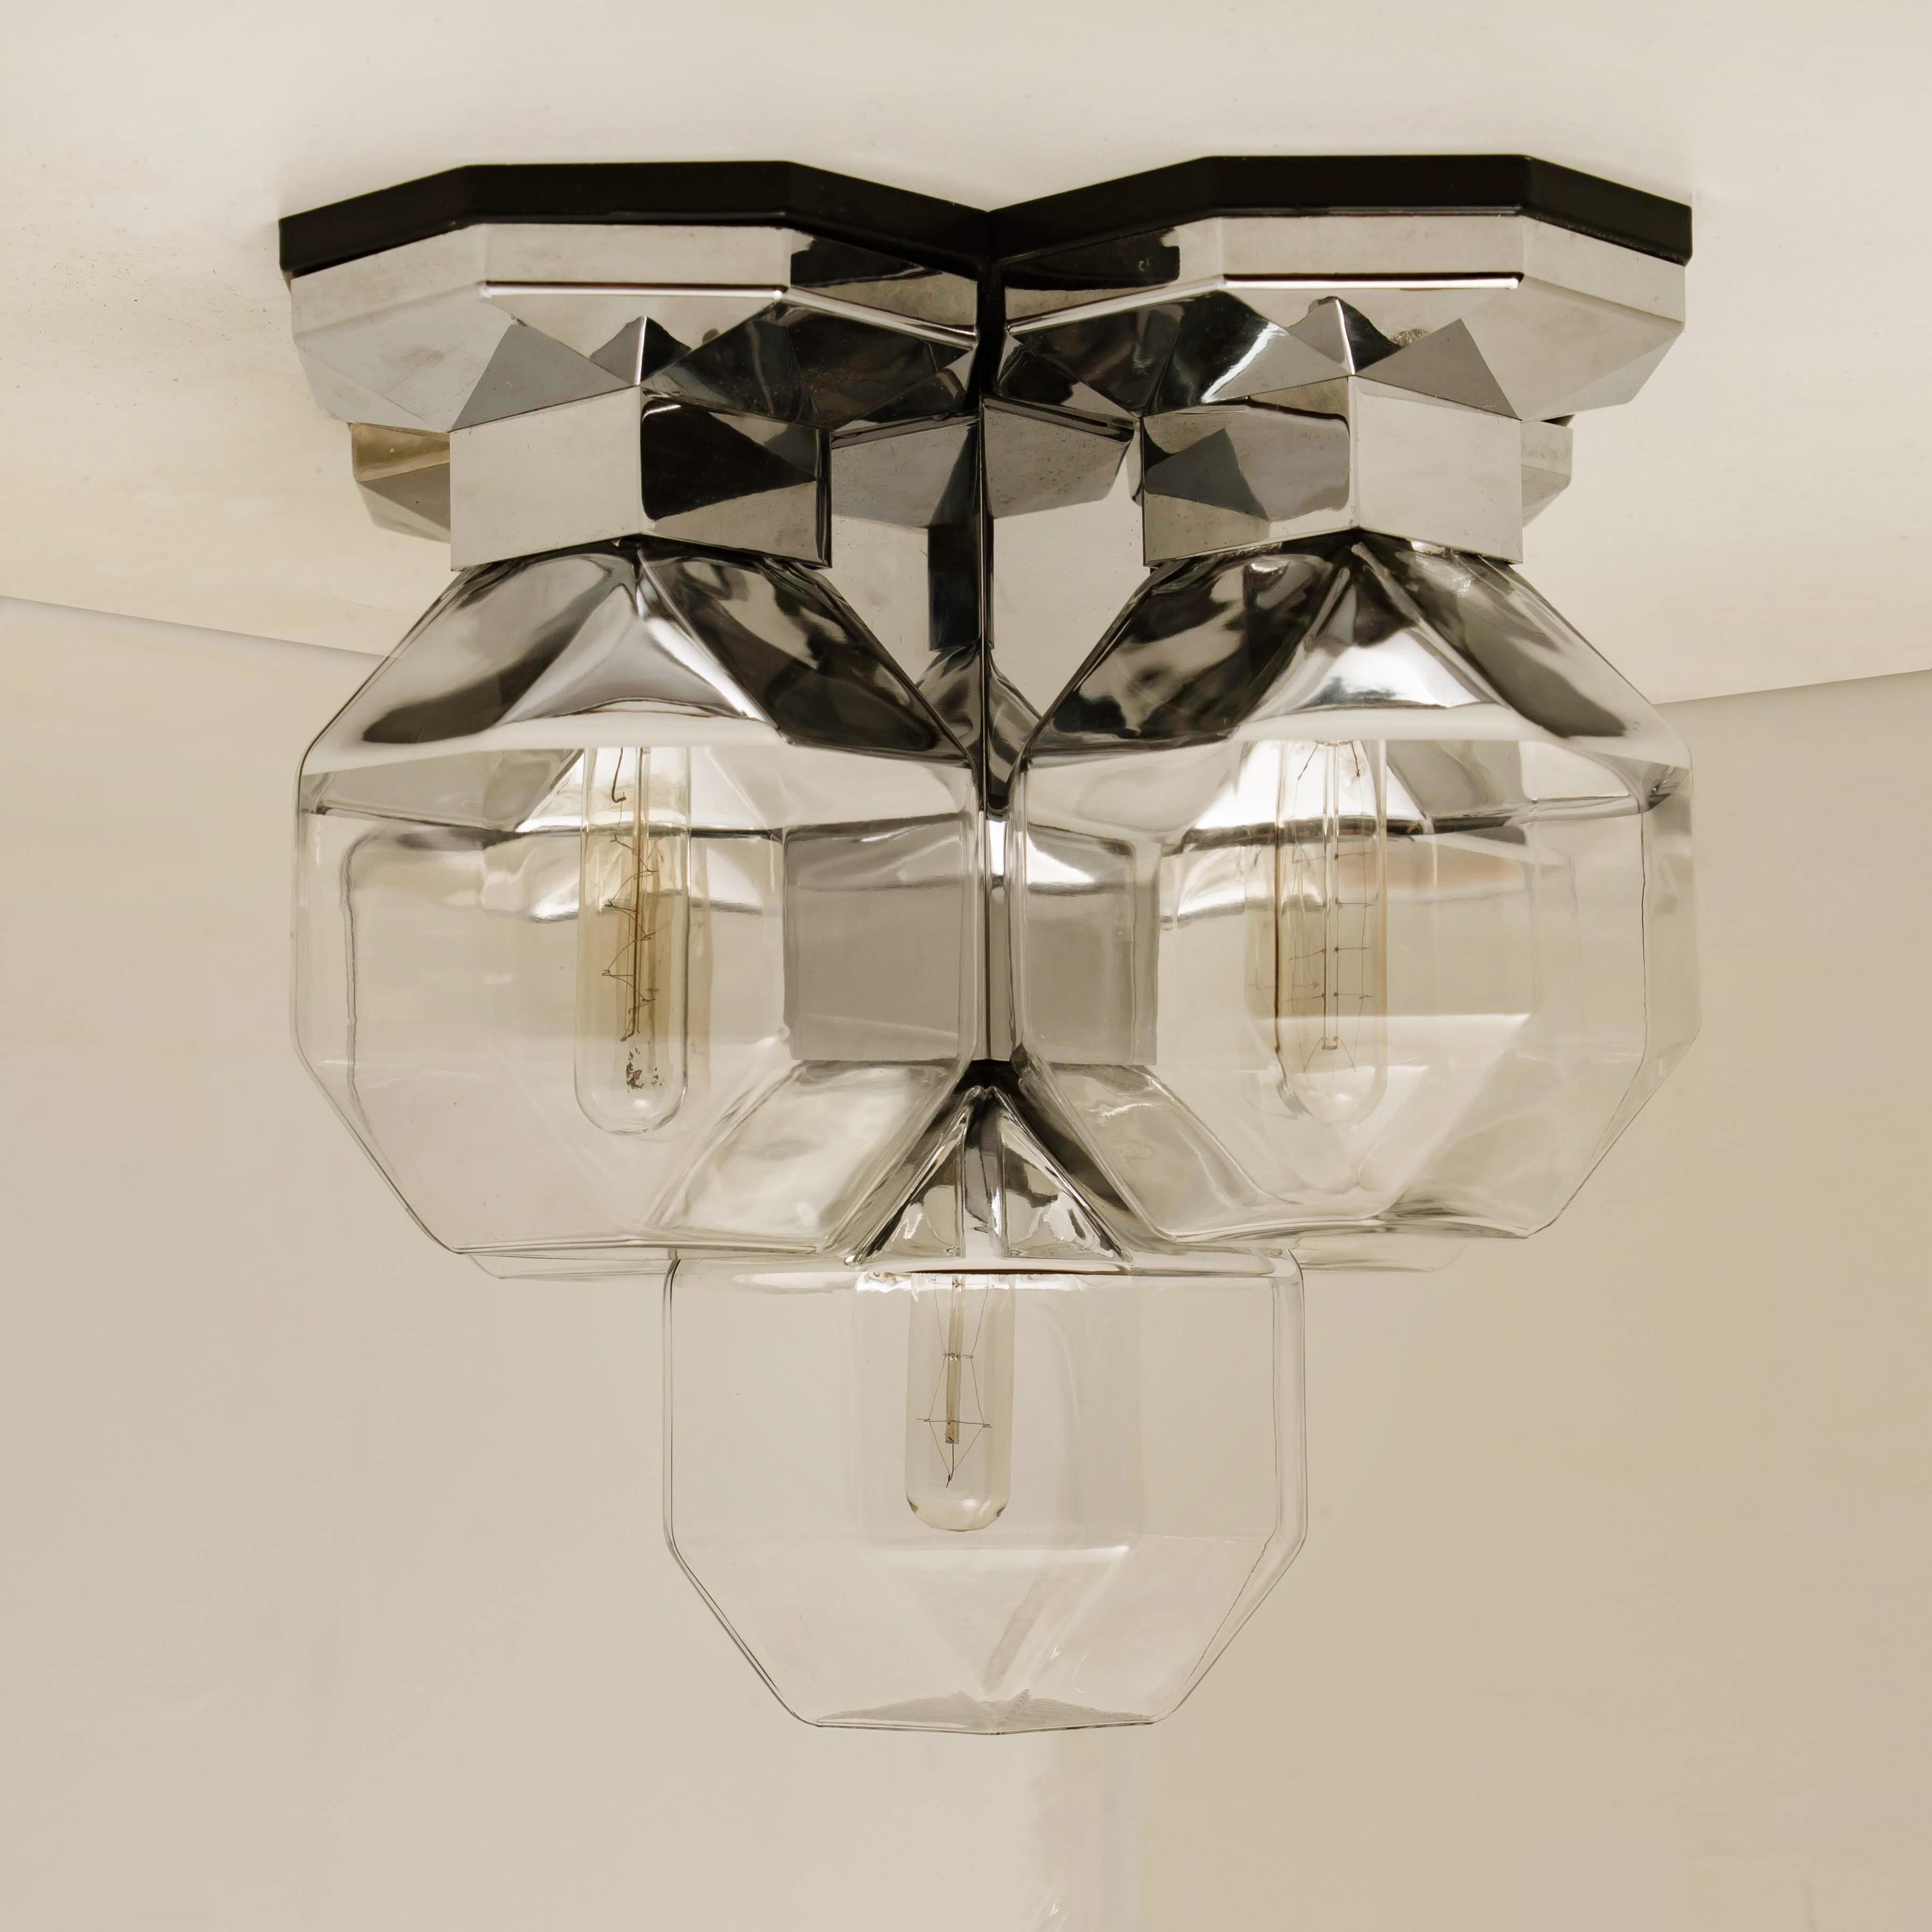 One of the Four Wall or Ceiling Lamp by Motoko Ishii for Staff, 1970s For Sale 10